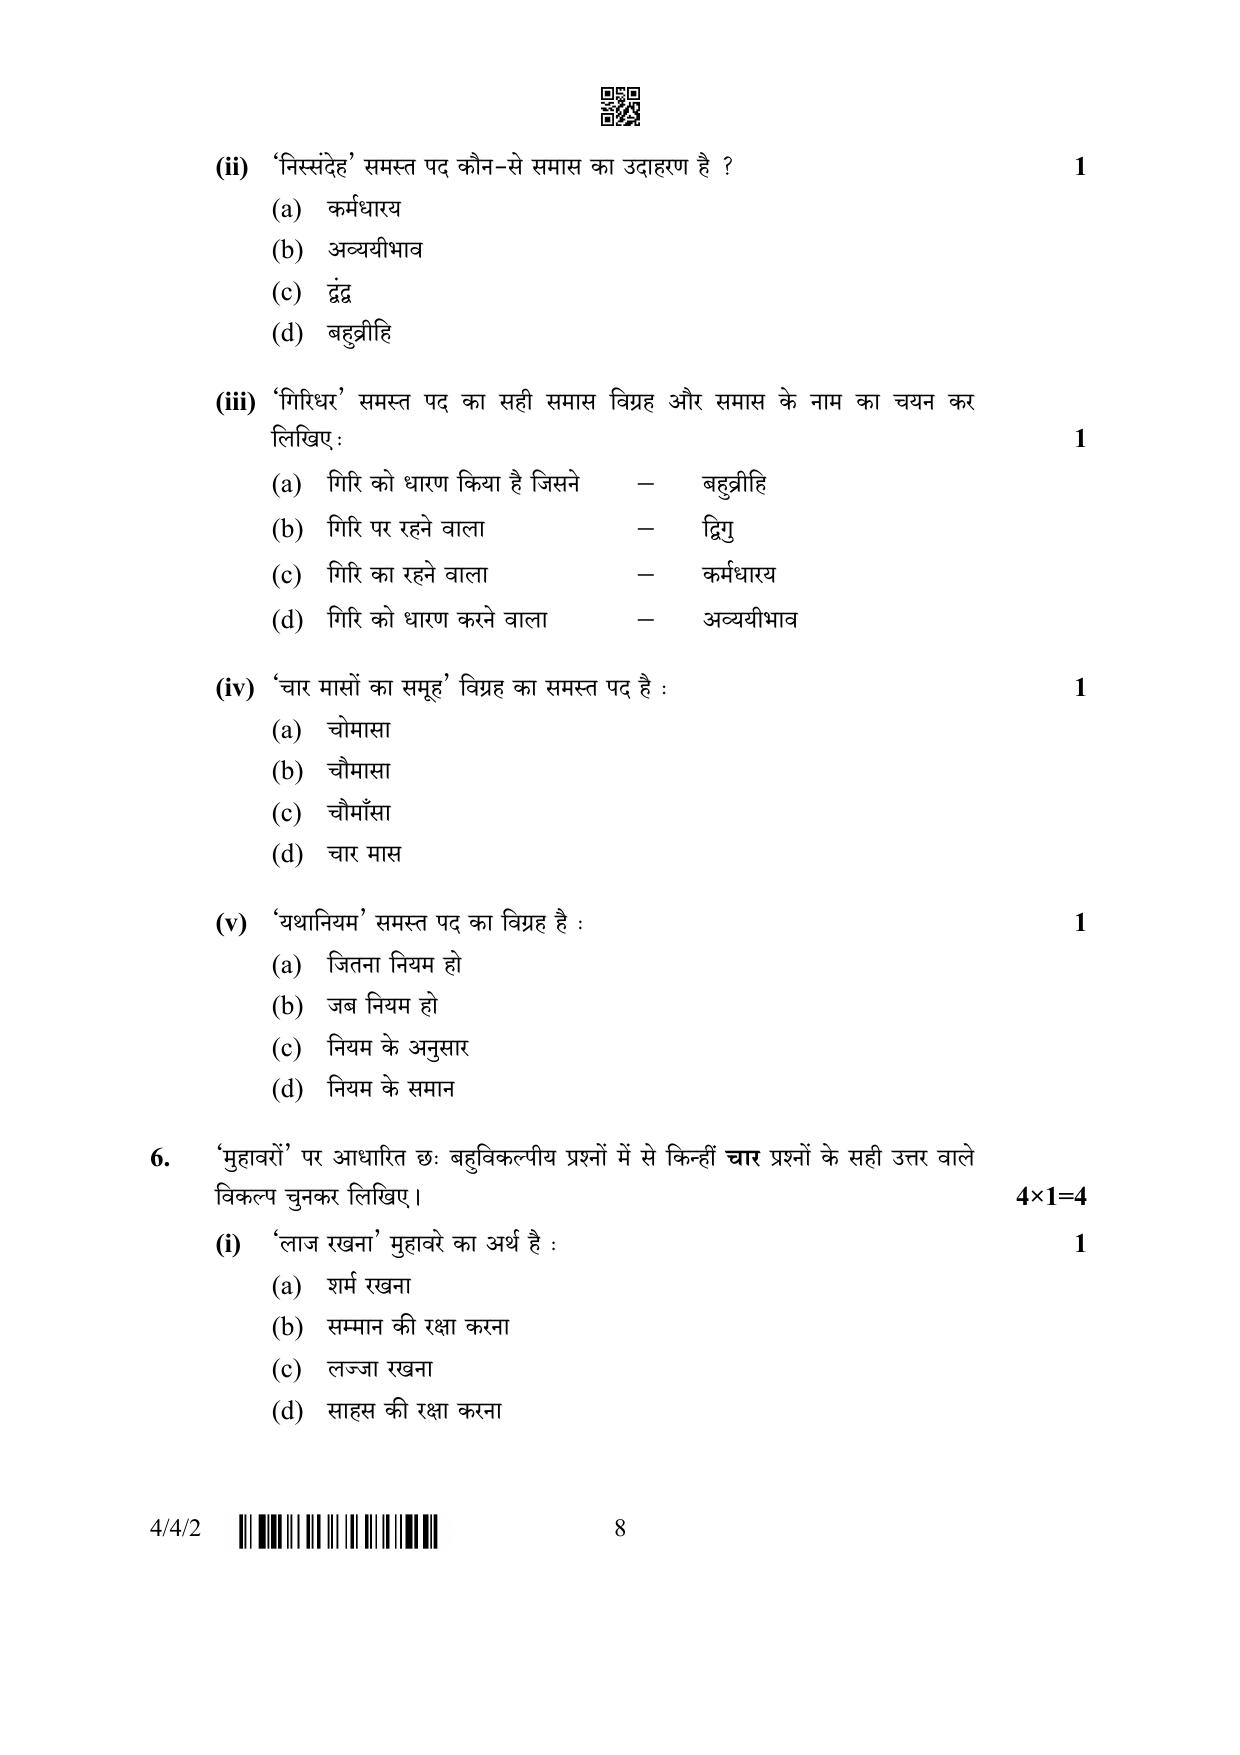 CBSE Class 10 4-4-2 Hindi B 2023 Question Paper - Page 8